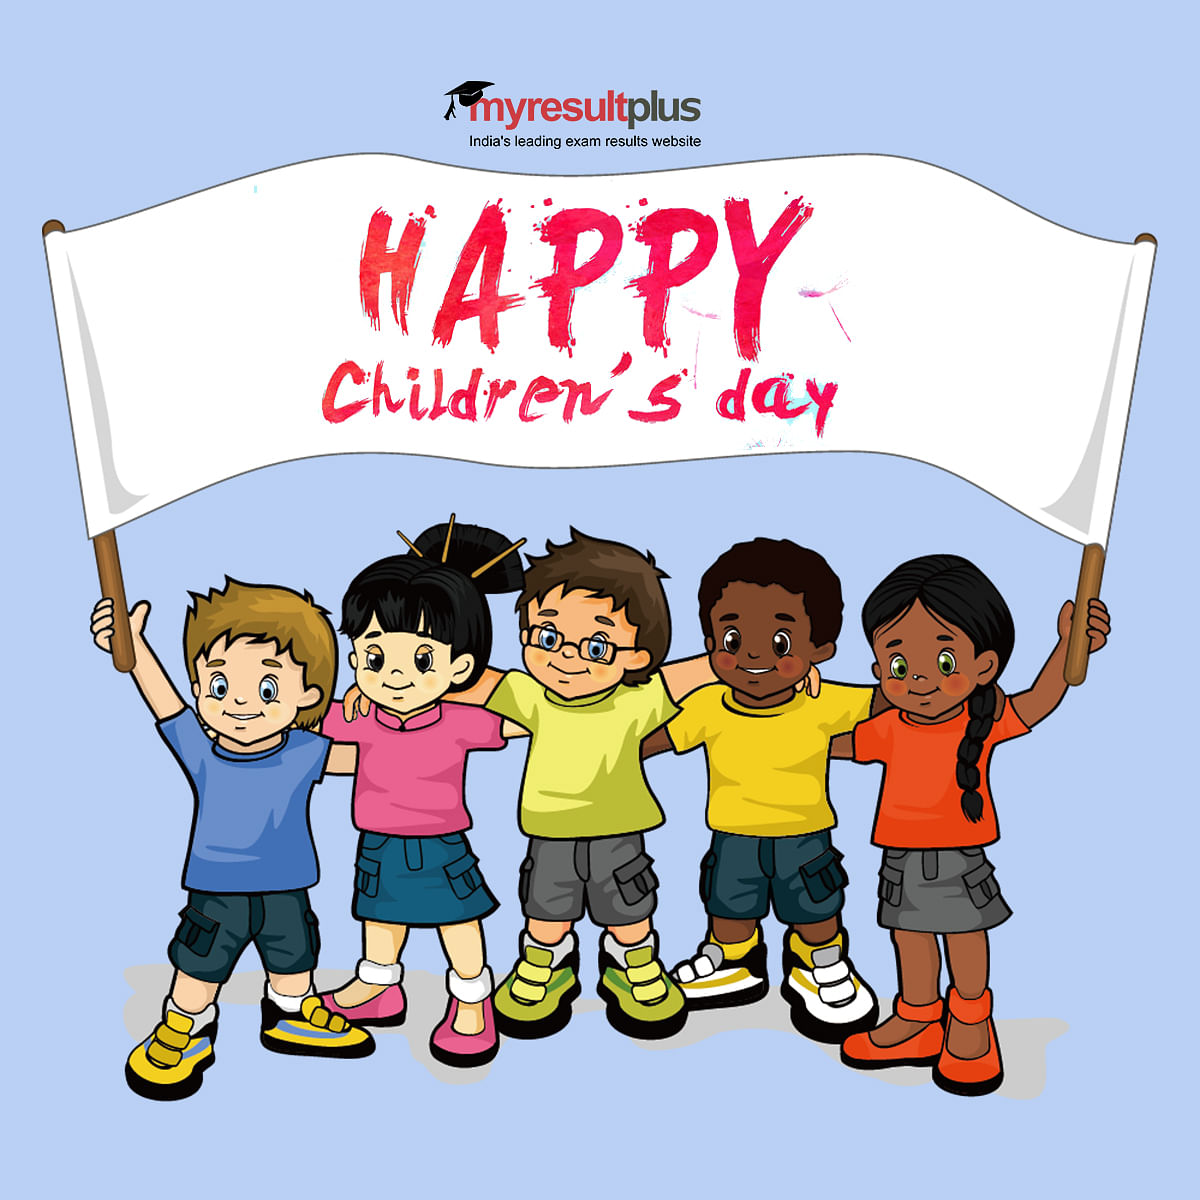 Happy Children's Day 2023: Date, Wishes, Quotes, Messages & Images